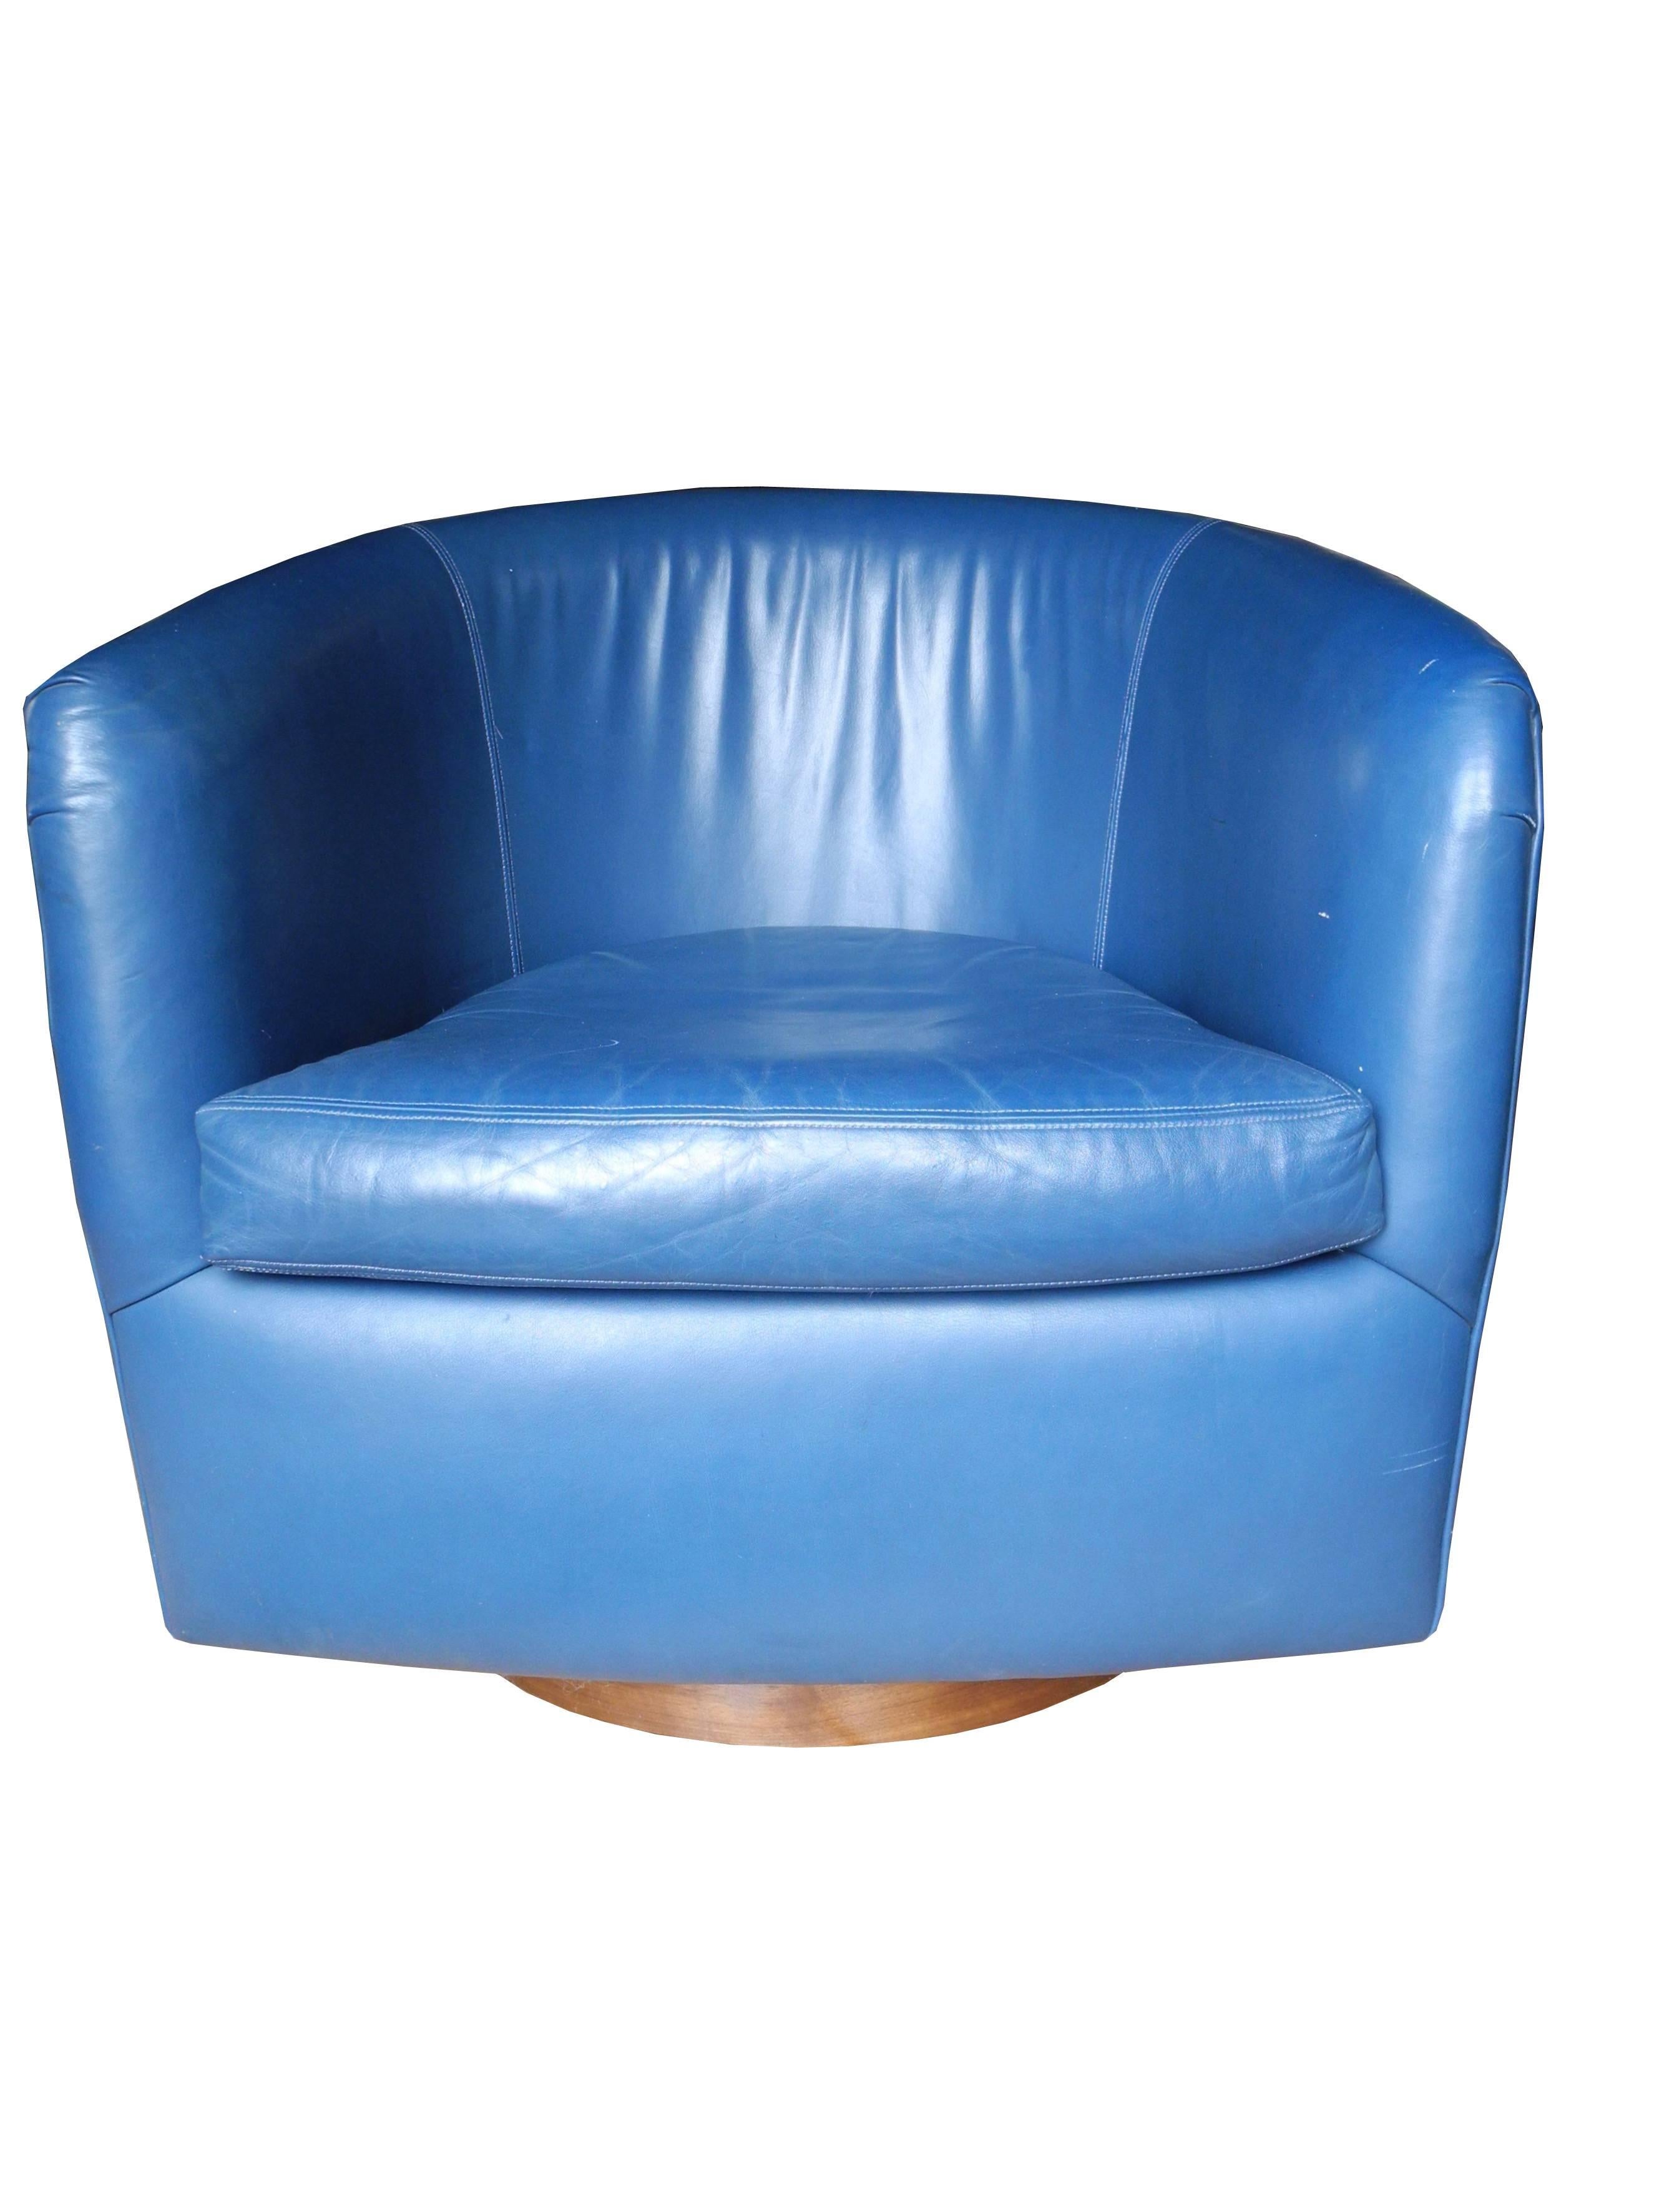 20th Century Pair of Mid-Century Modern Blue Leather Swivel Lounge Chairs by Milo Baughman